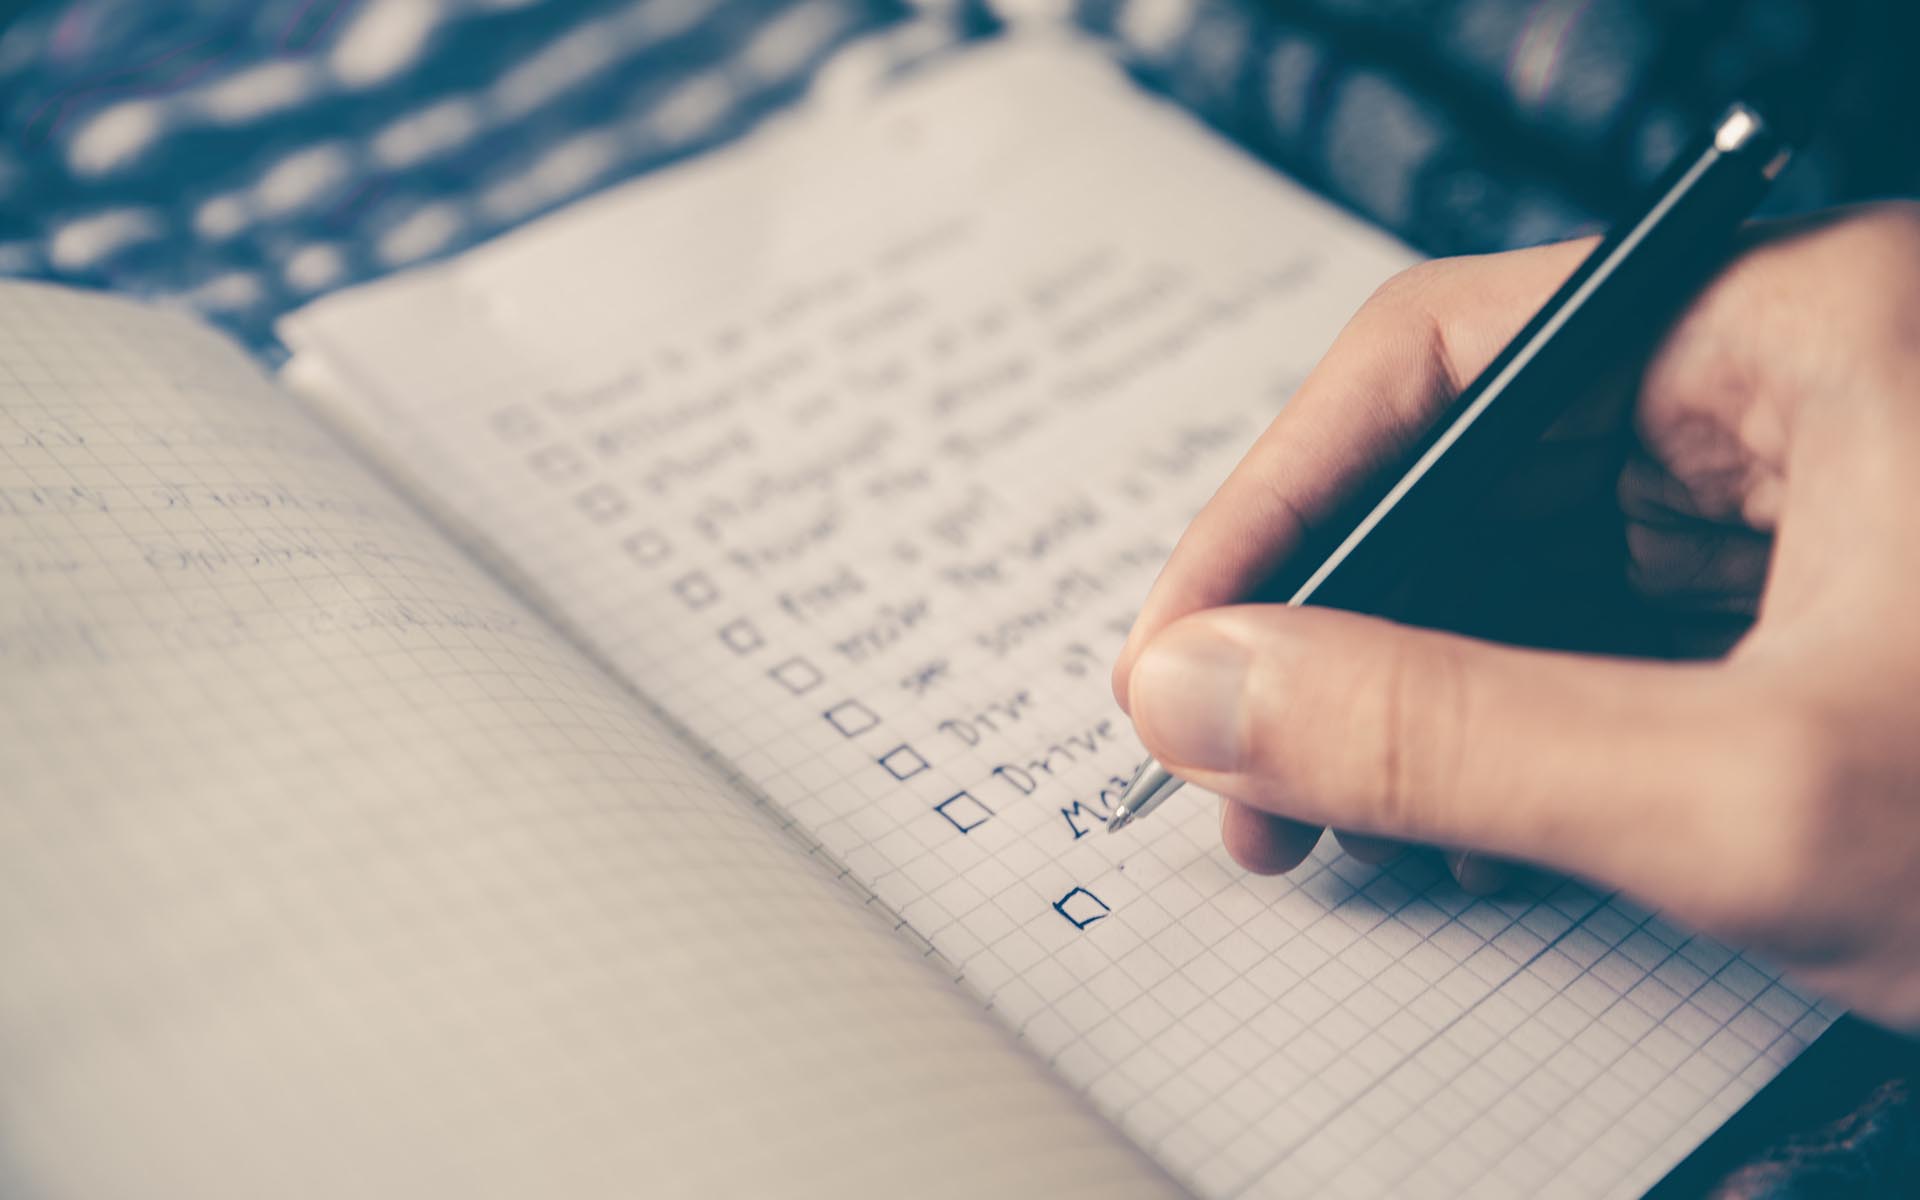 Creating a checklist in a notebook